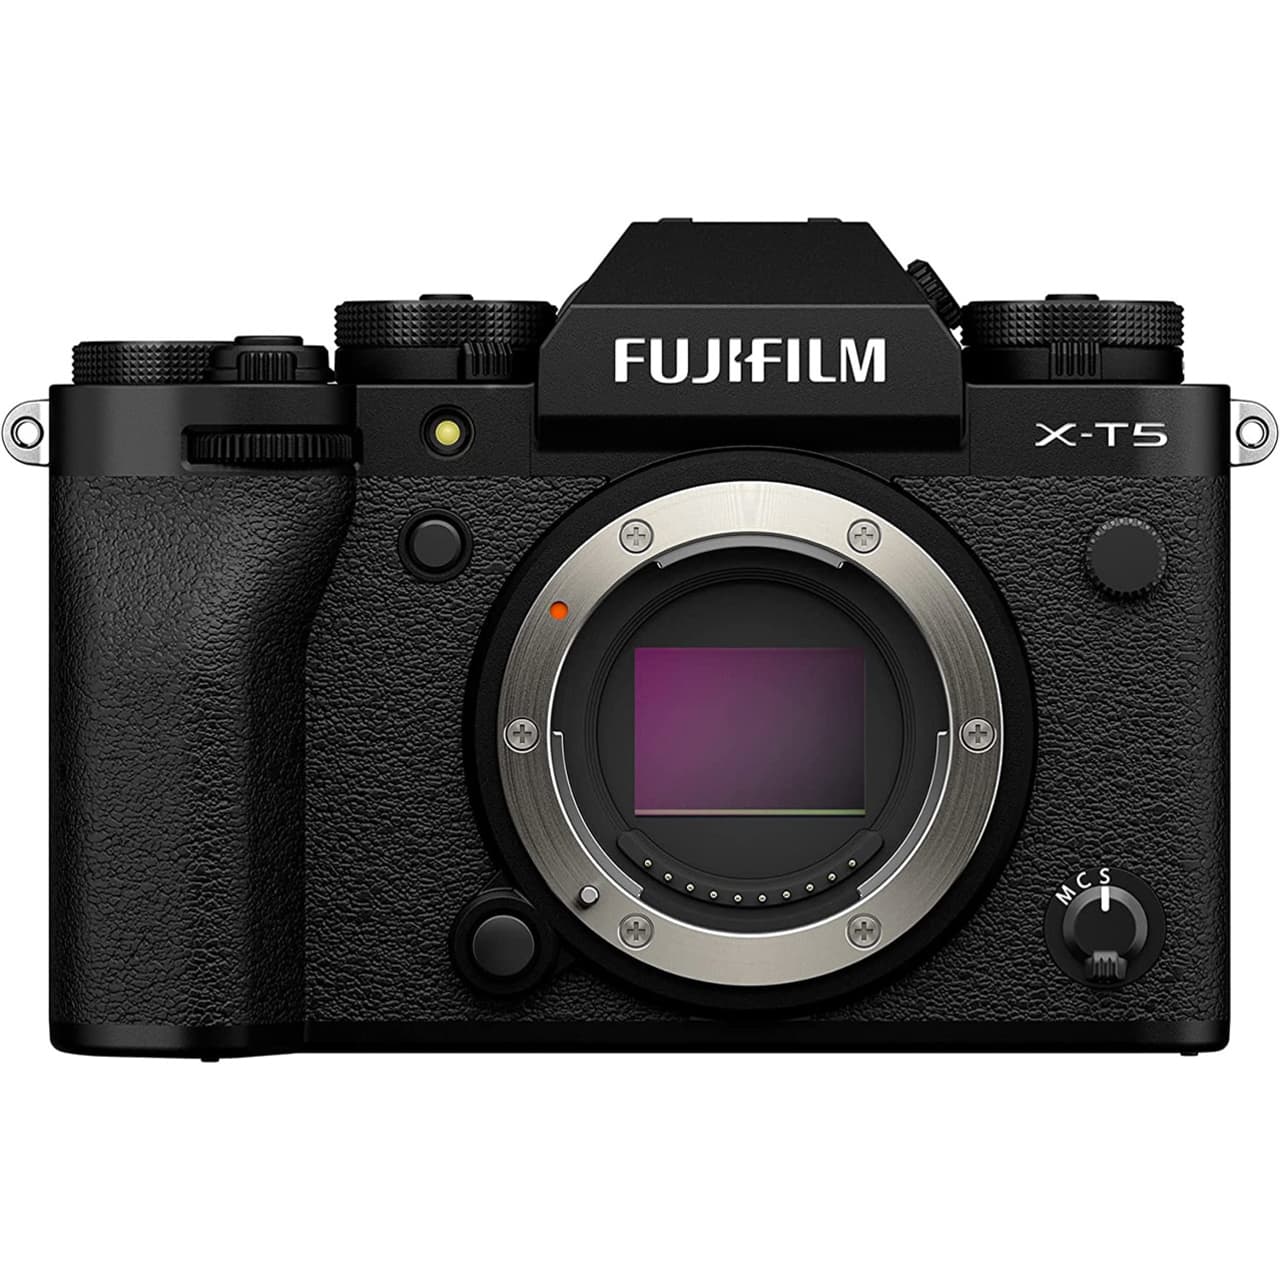 Camera reviews and advice - Which?